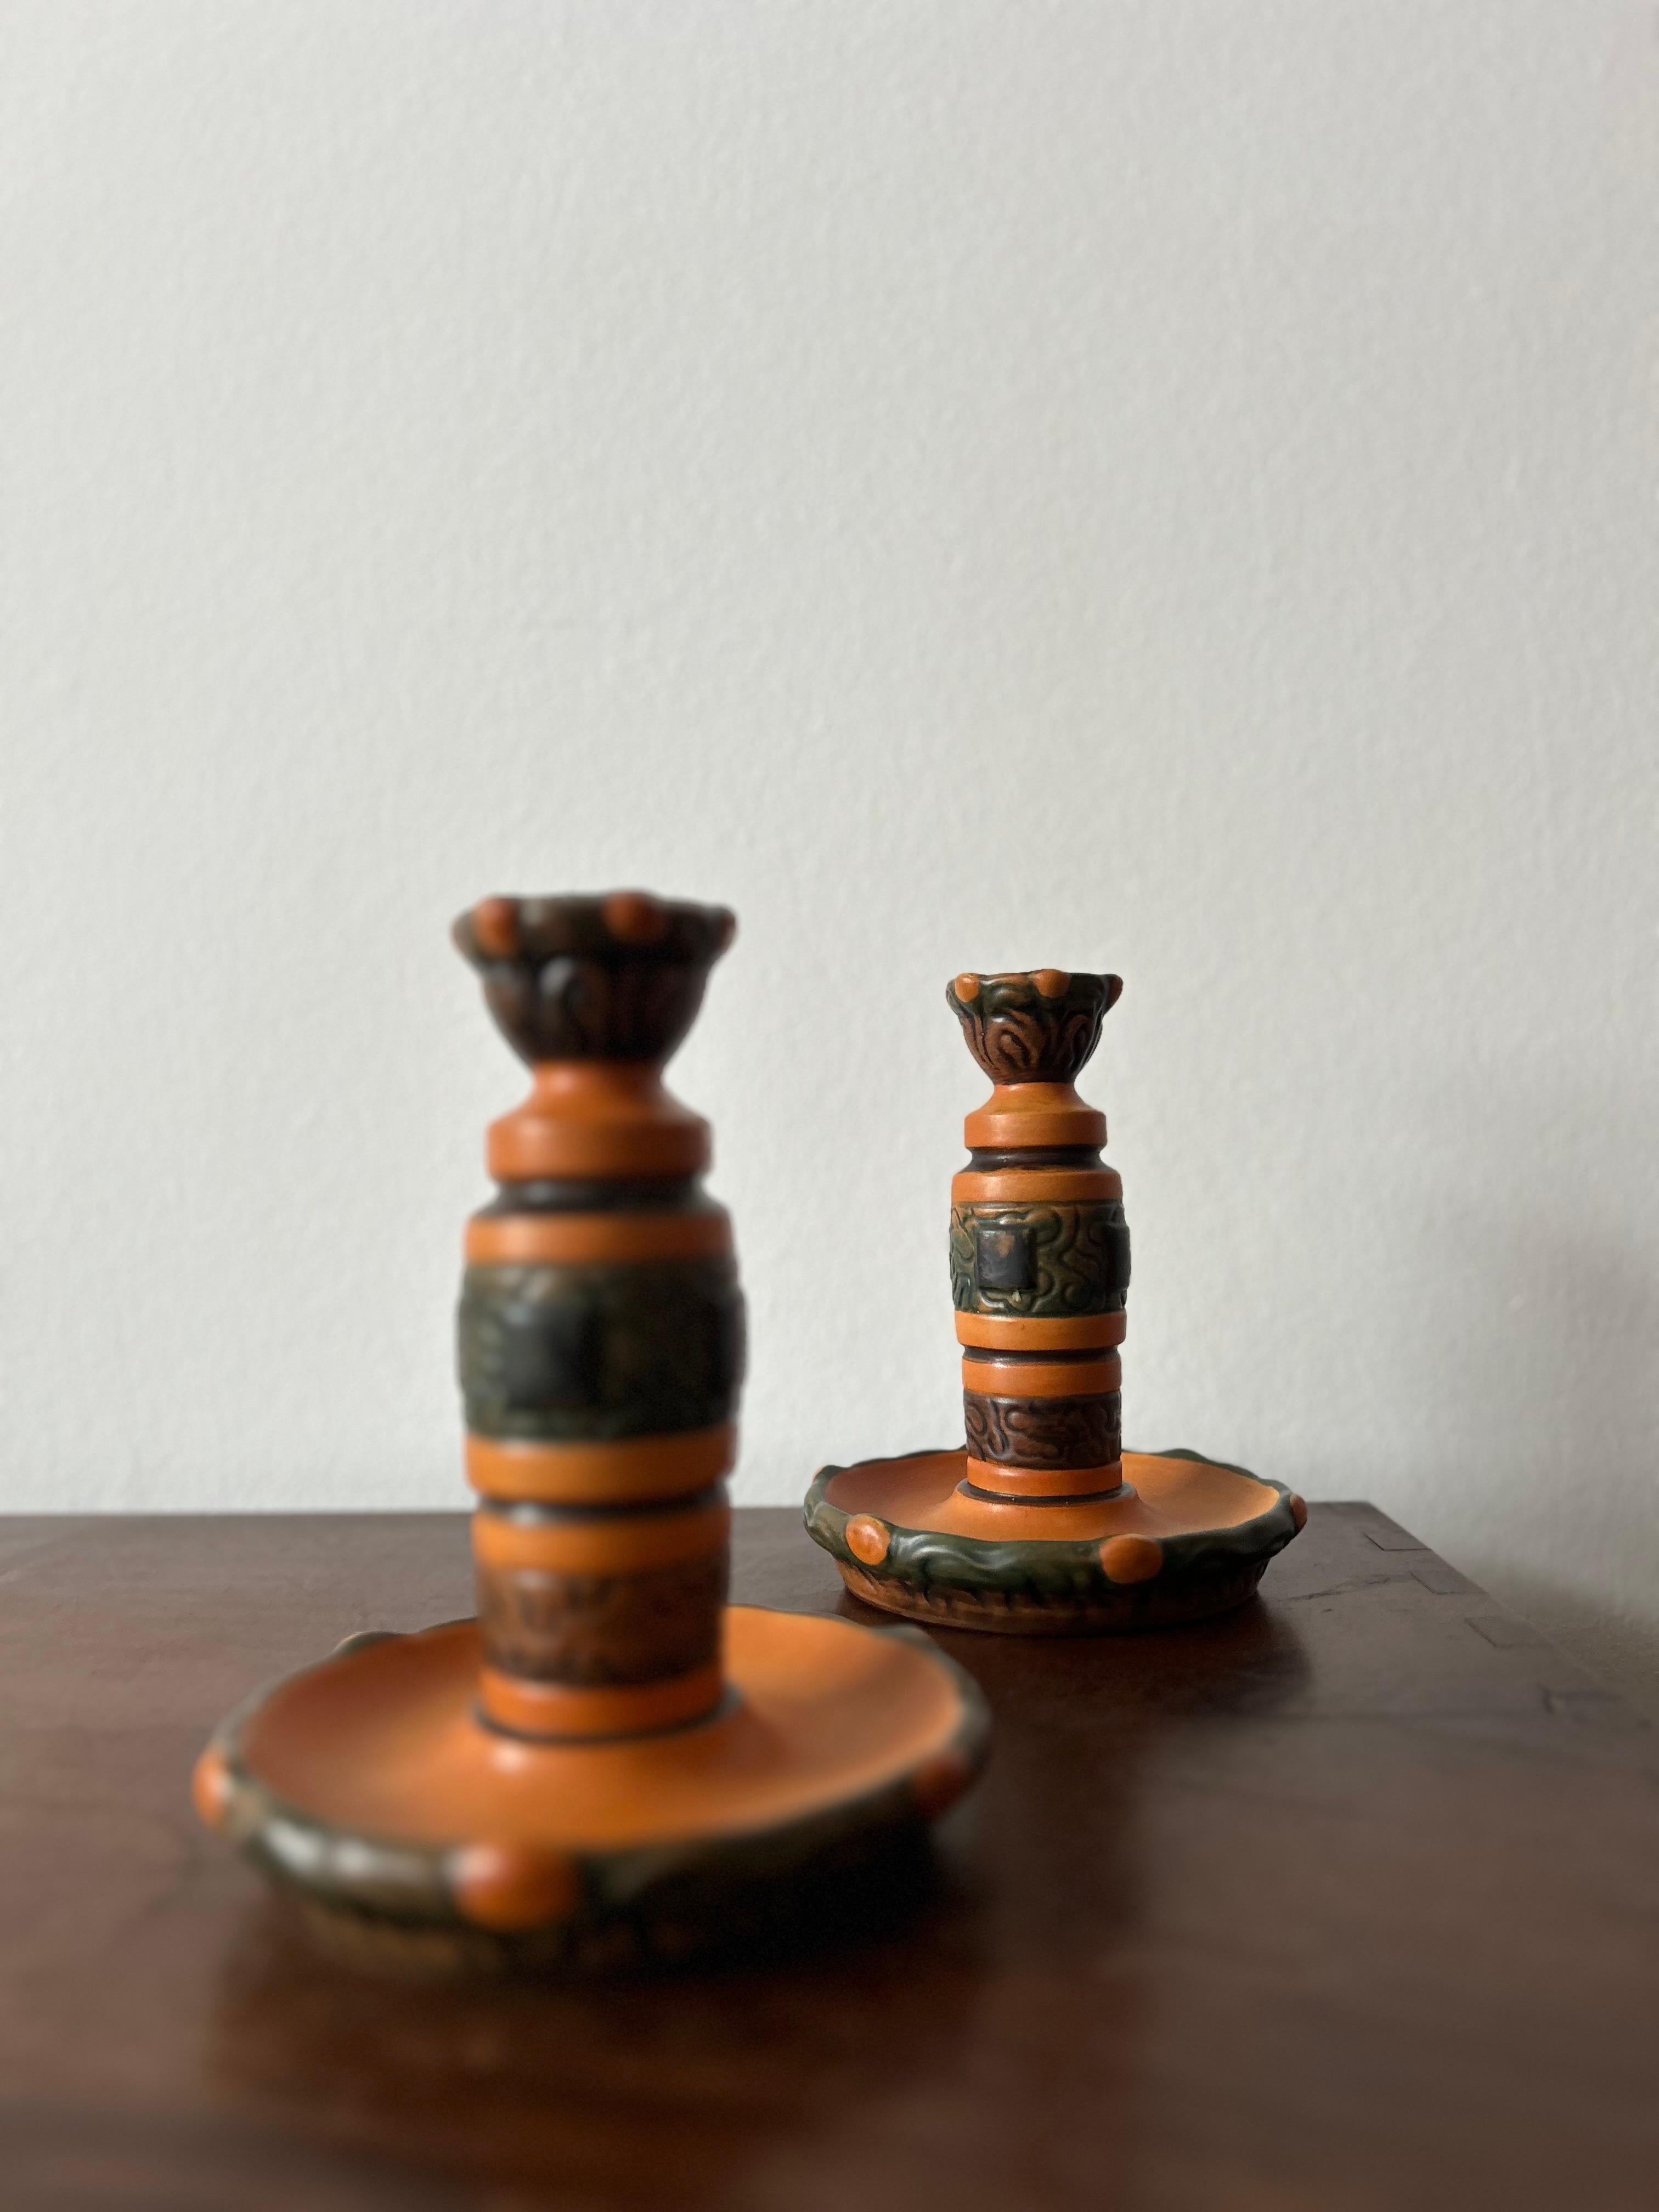 Pair of Thorvald Bindesbøll Candle Sticks for P Ipsens Enke, Denmark 1900’s In Good Condition For Sale In Valby, 84